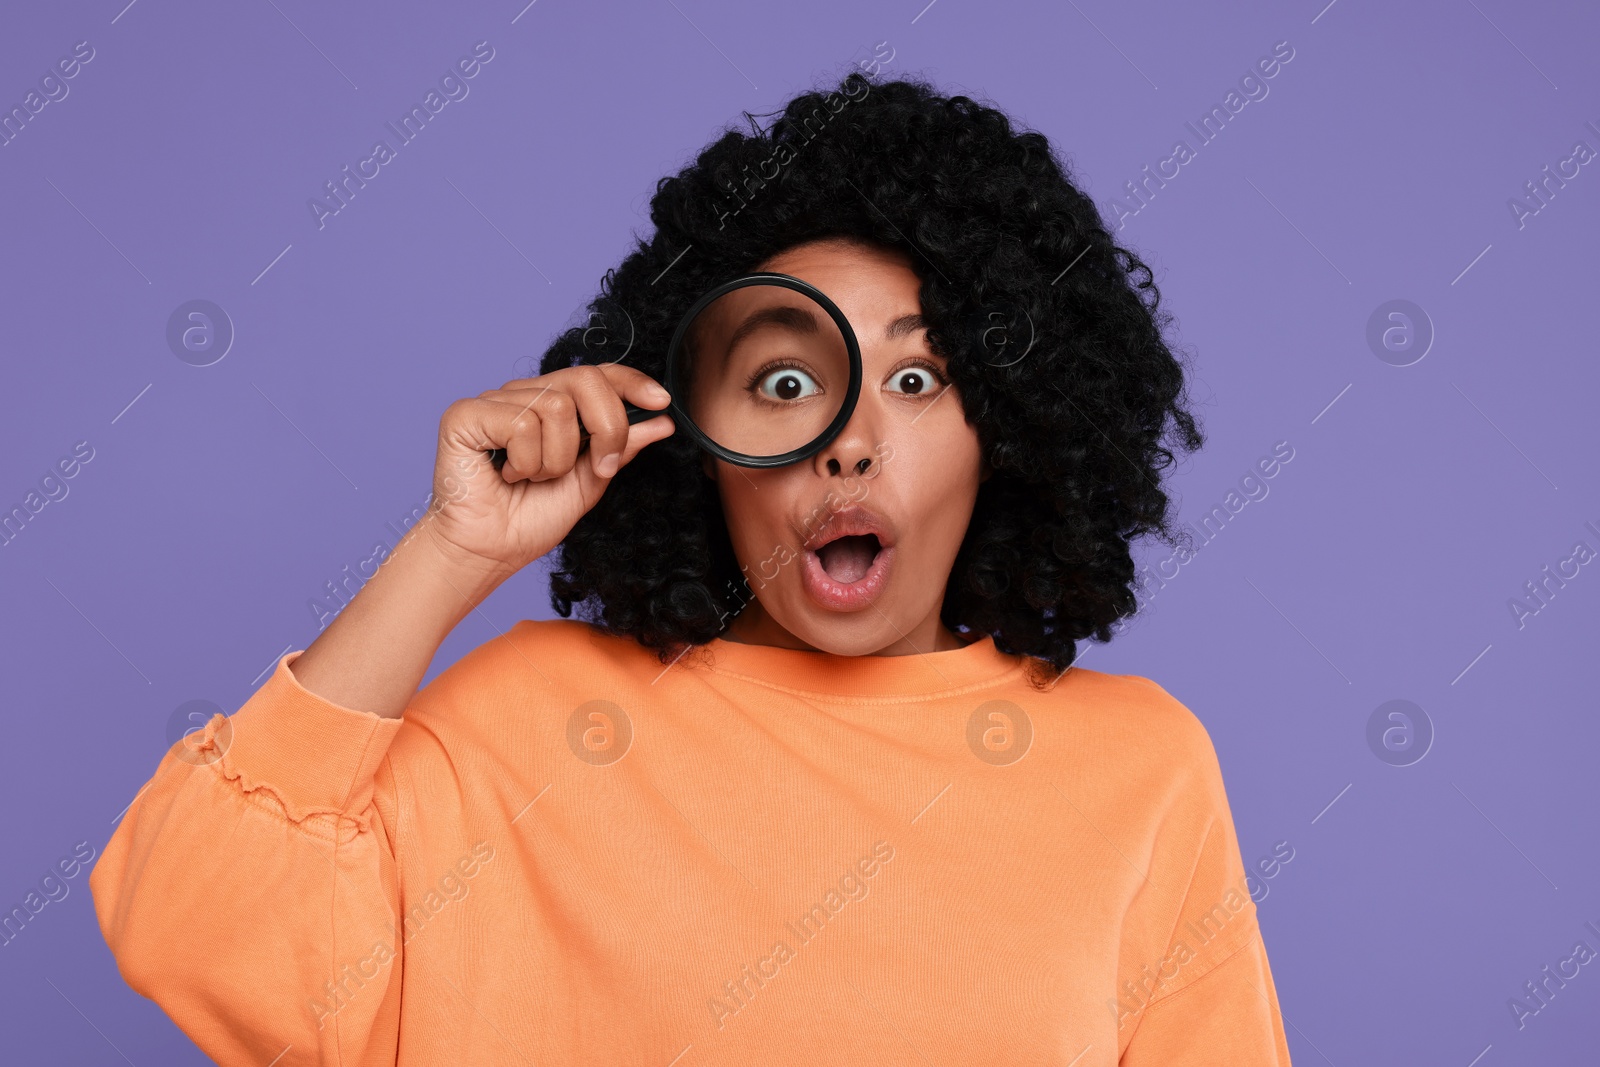 Photo of Emotional woman looking through magnifier glass on purple background